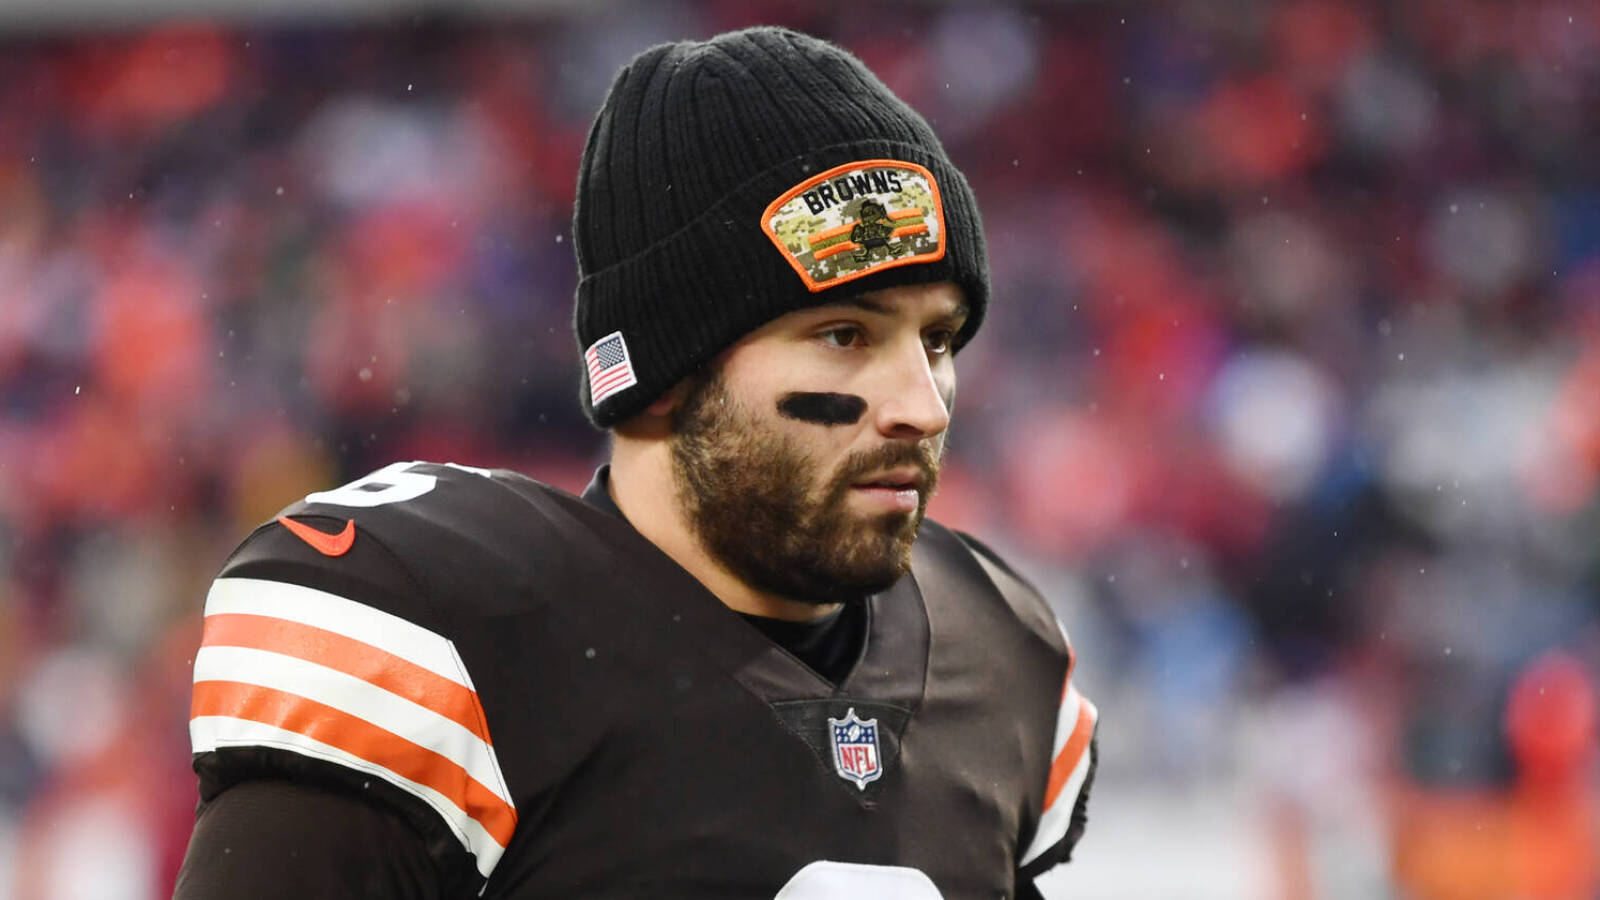 YB: Cleveland Browns audio clip 